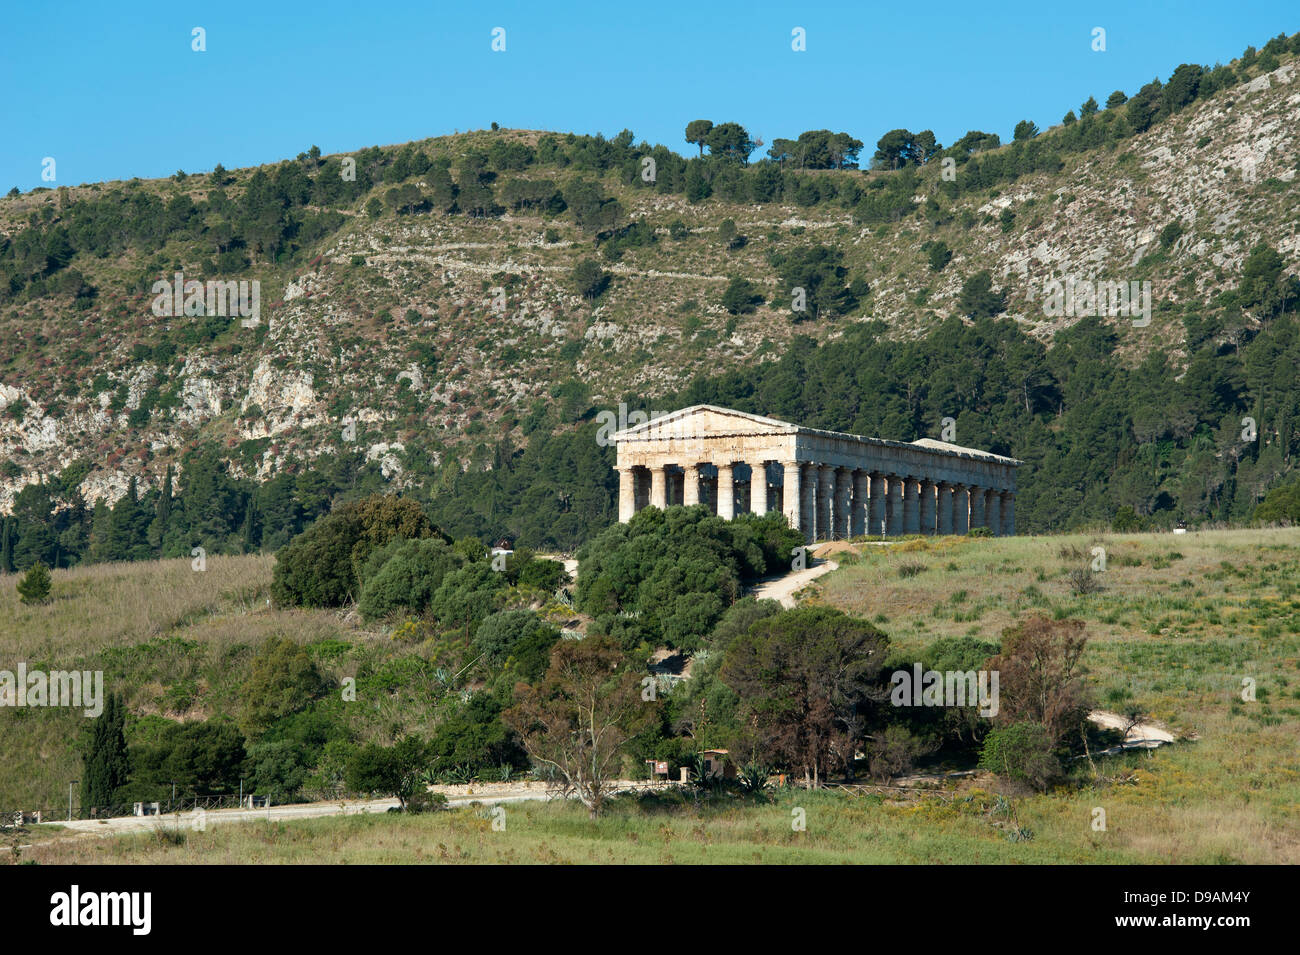 Temple, Segesta, Province Trapani, Sicily, Italy , Tempel, Segesta, Provinz Trapani, Sizilien, Italien, dorischer Tempel, Elymer Stock Photo